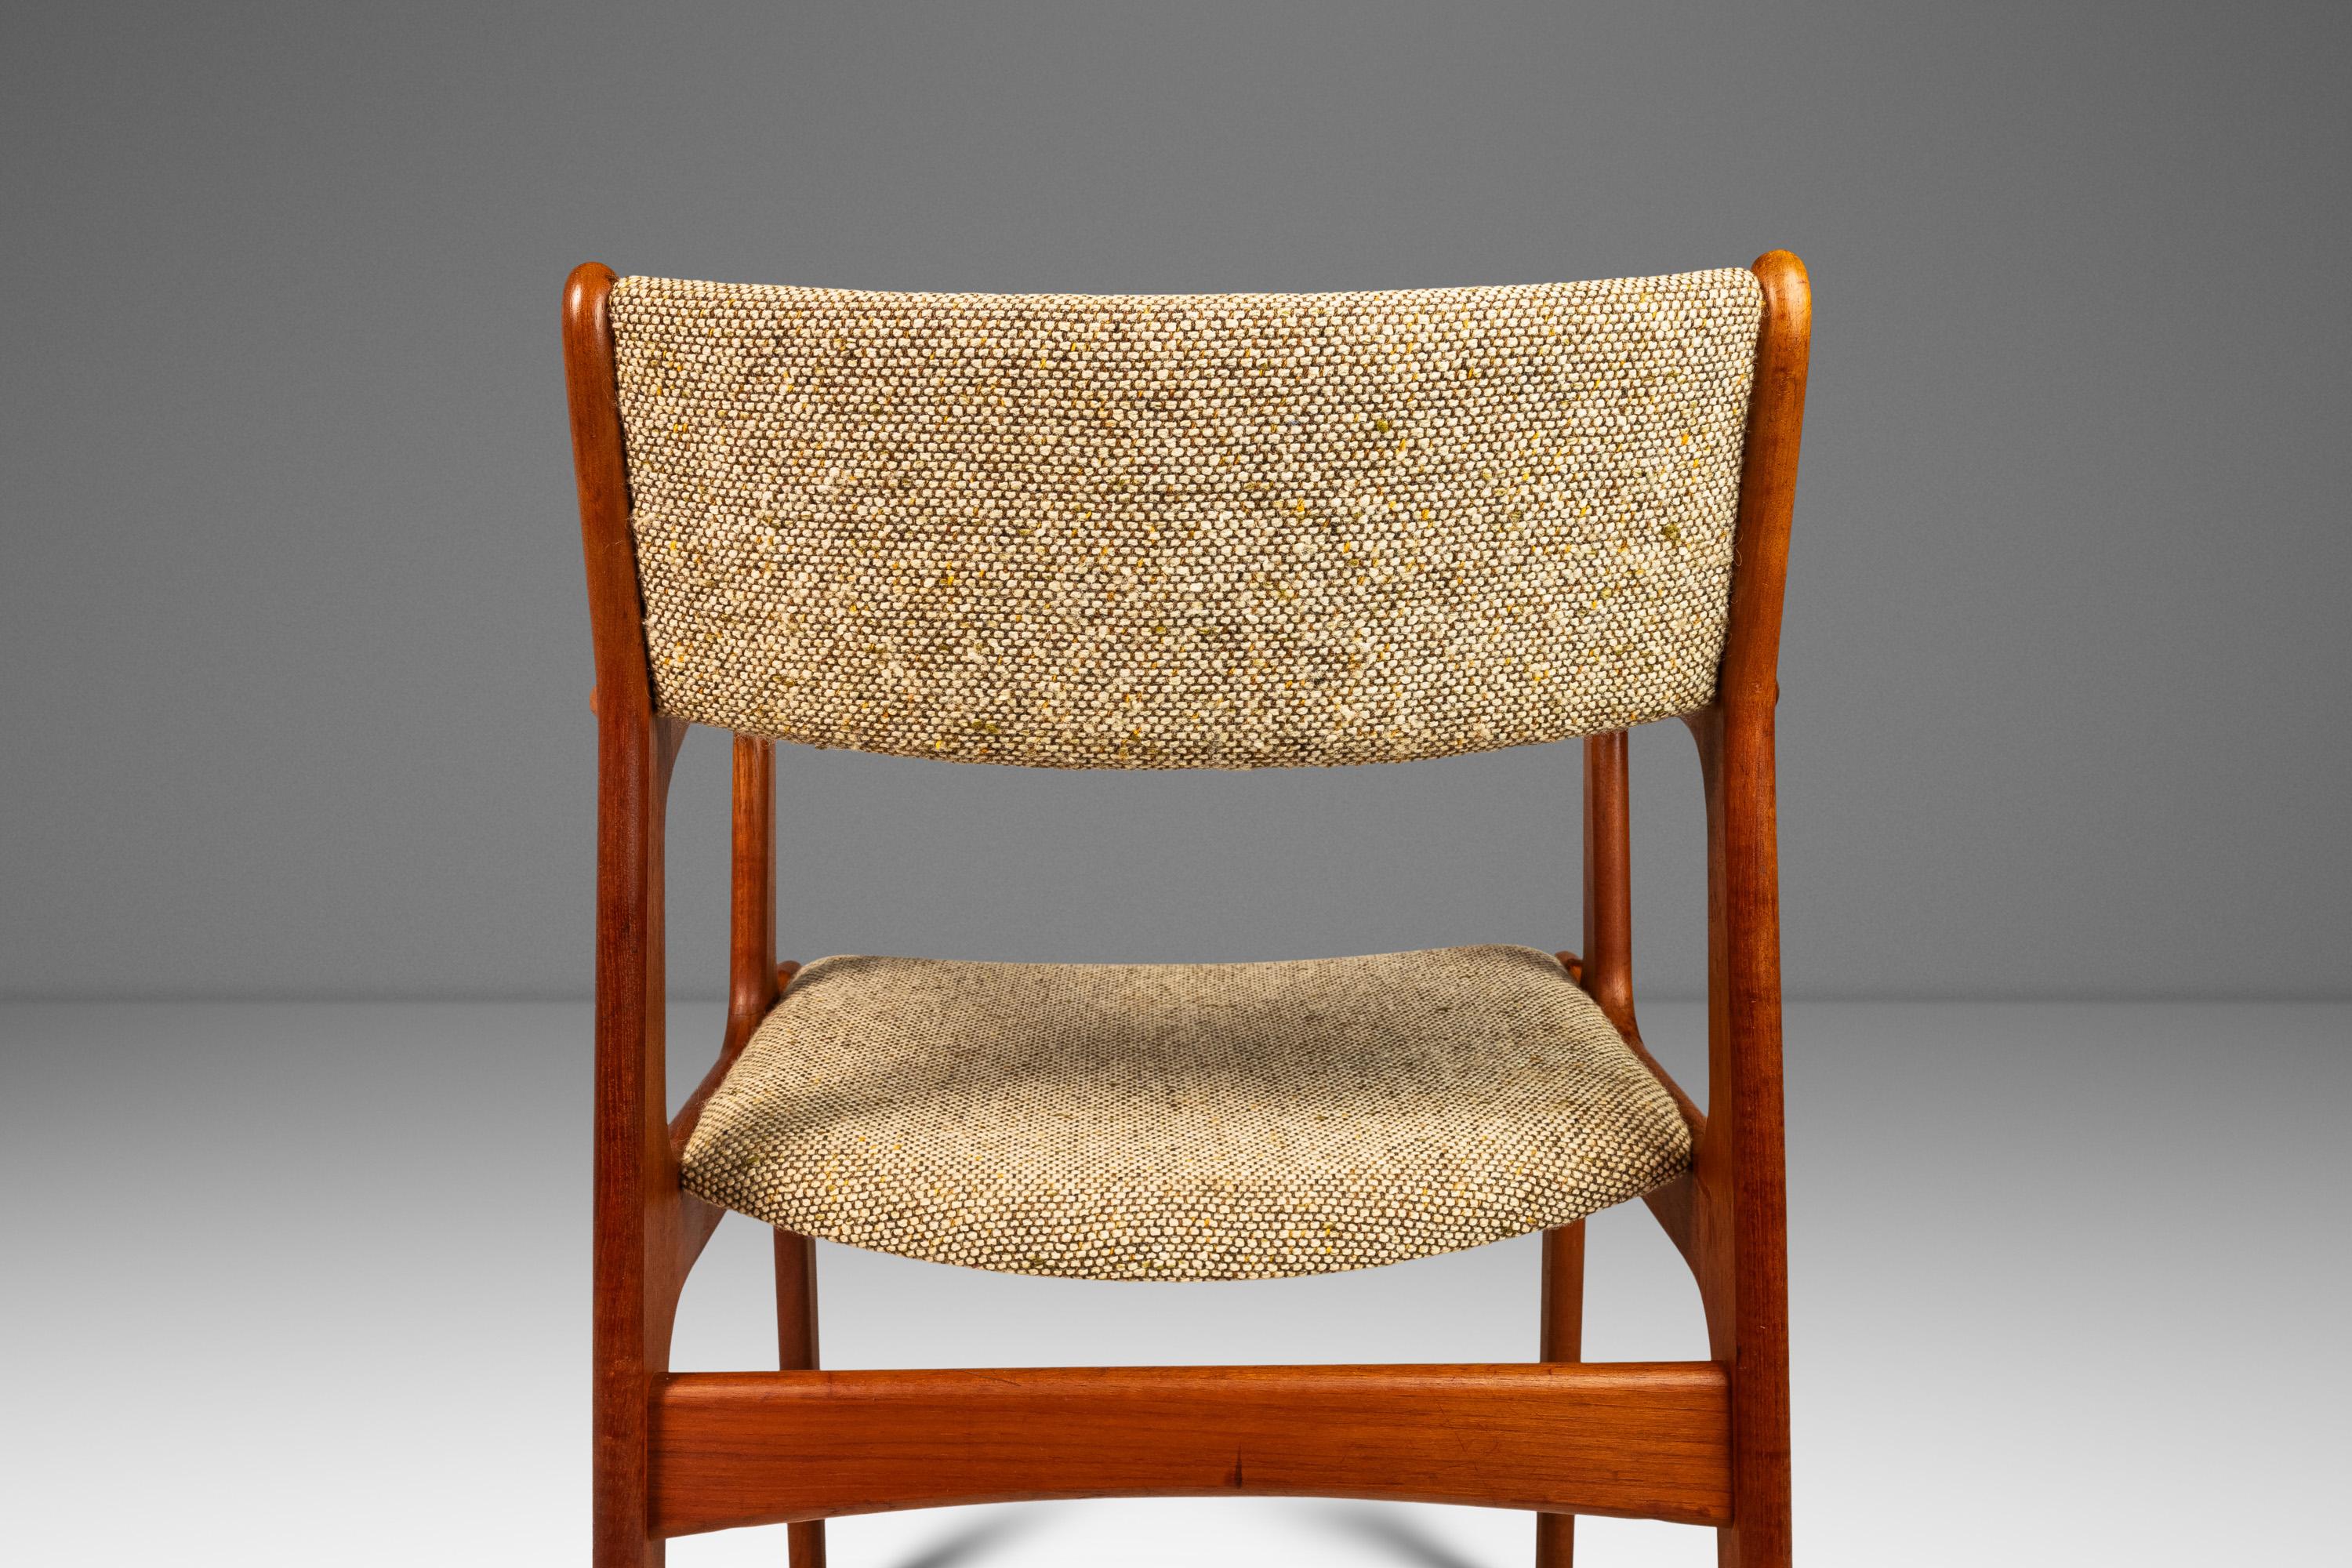 Danish Mid-Century Arm Chair in Solid Teak & Original Fabric by D-Scan, c. 1970s For Sale 6